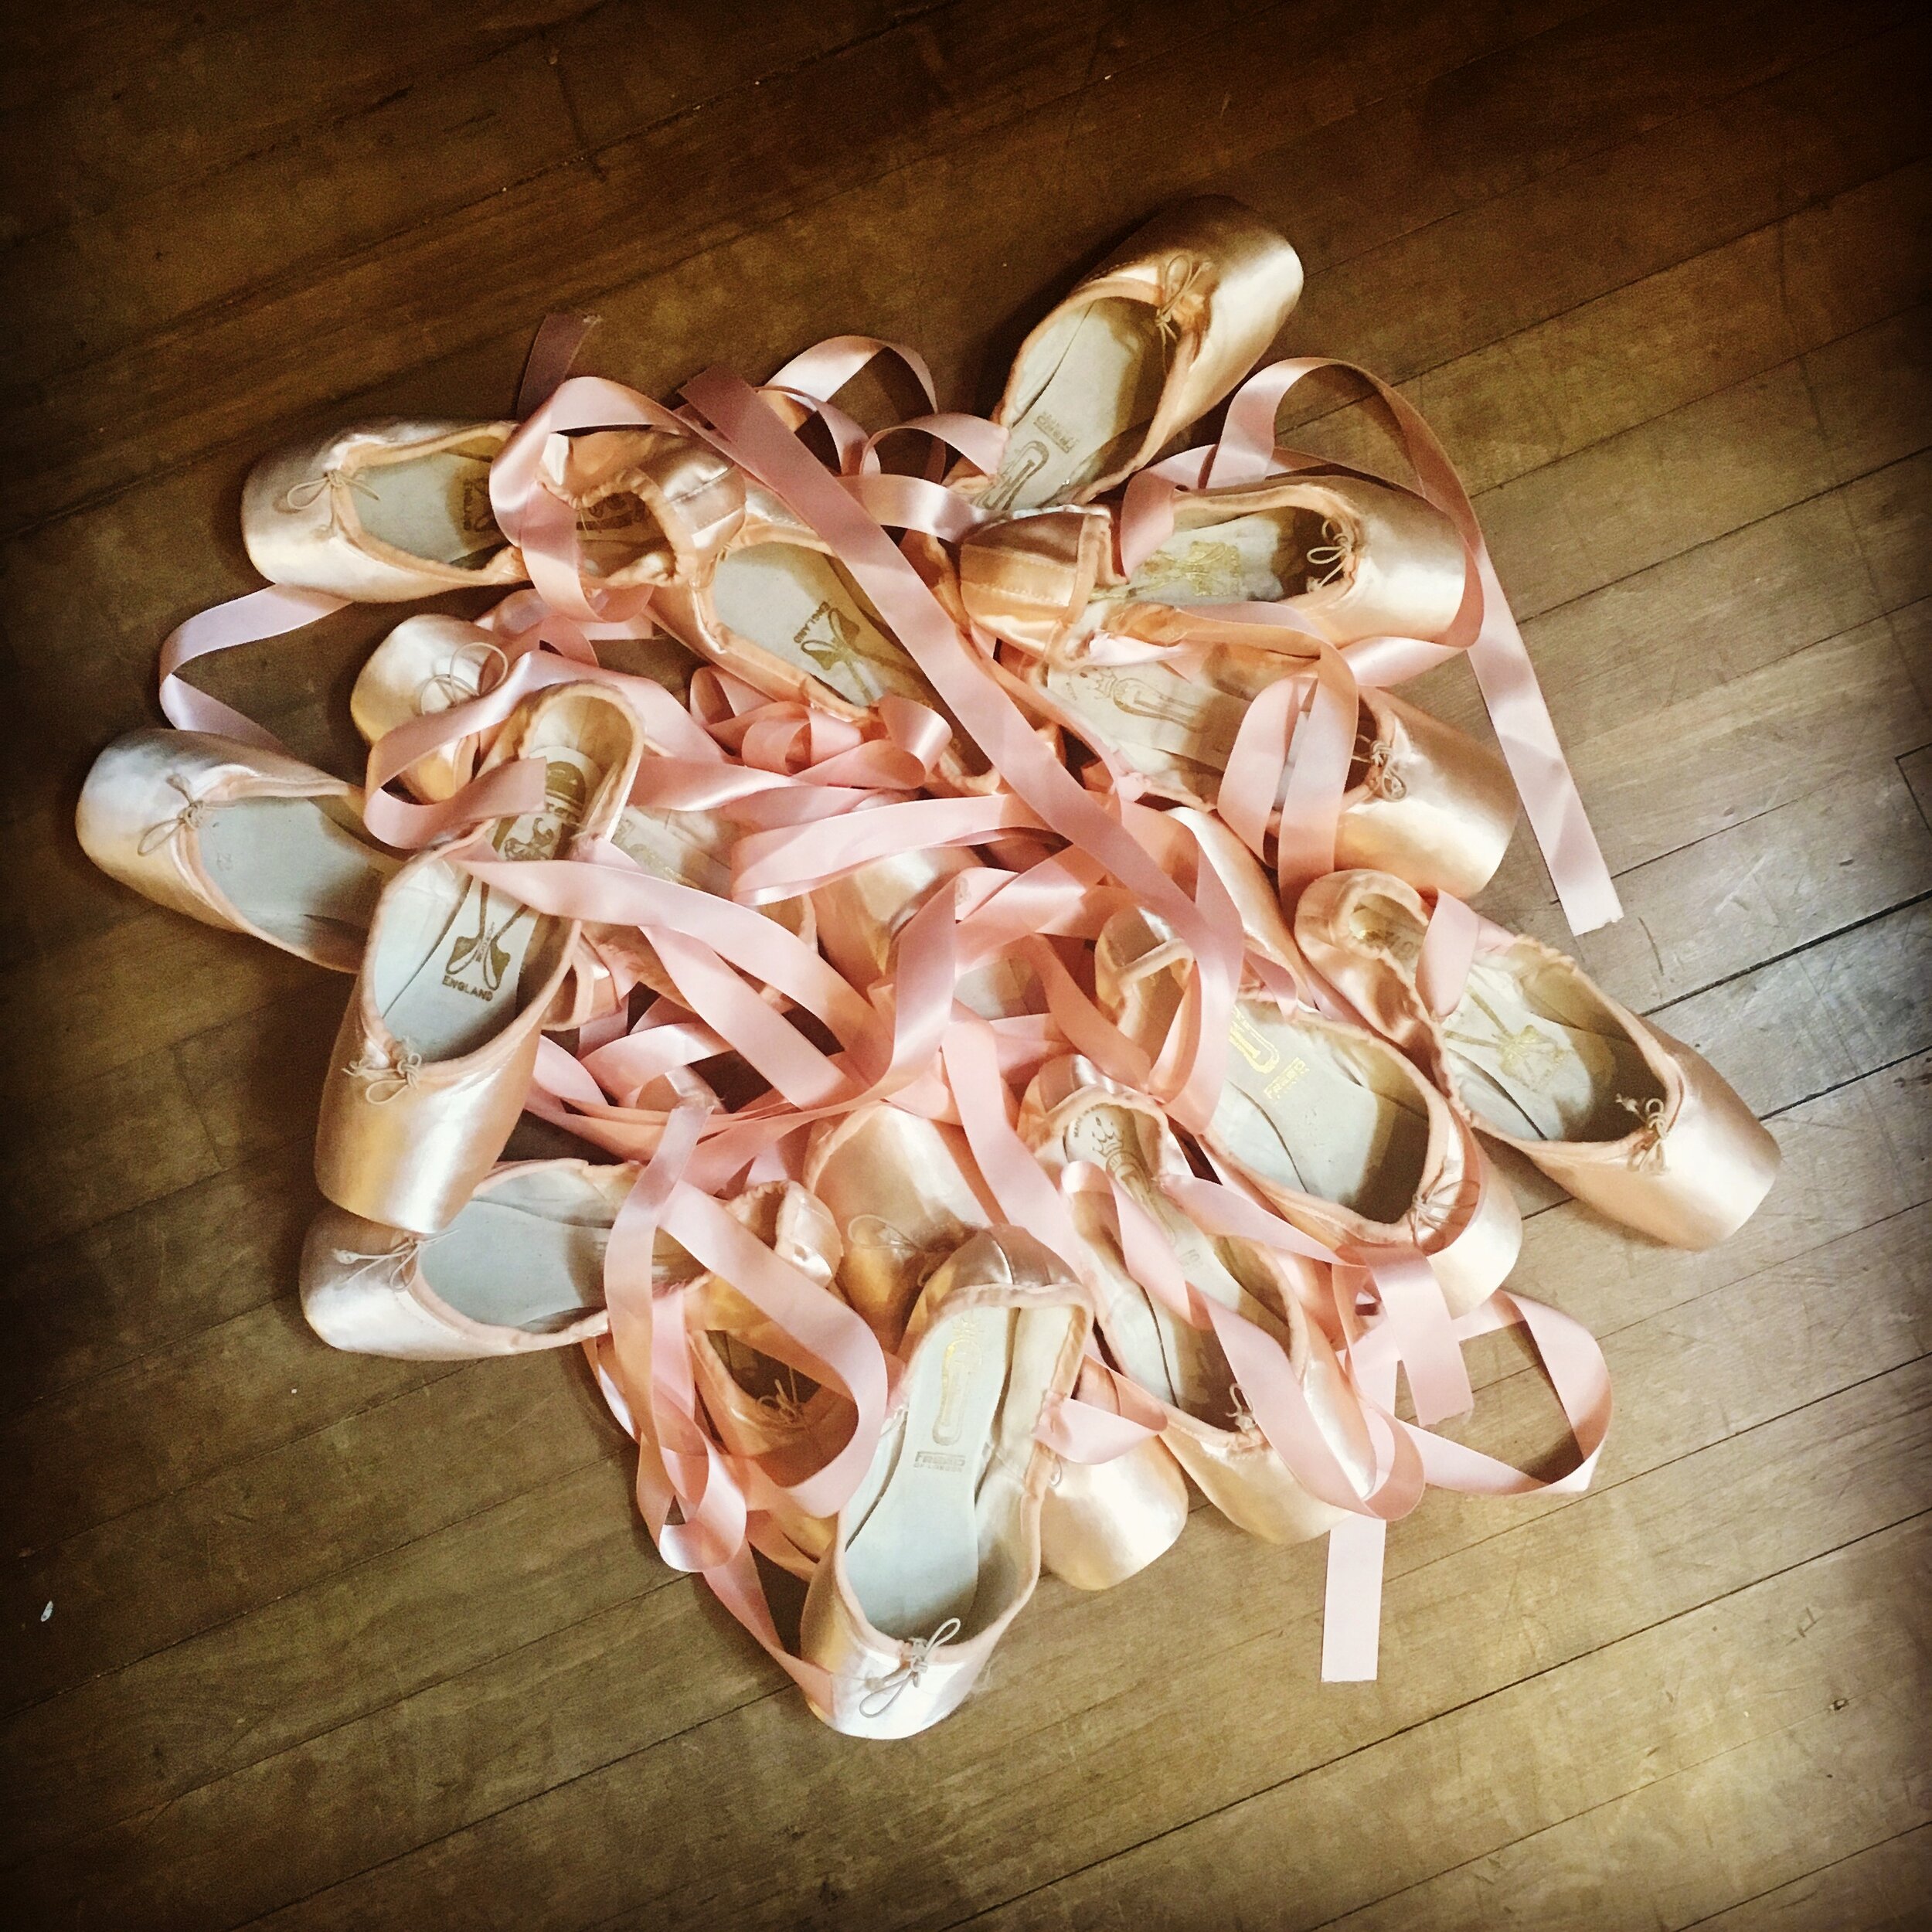 Toeing the Line: The Gender Politics of Pointe Shoes — Amy